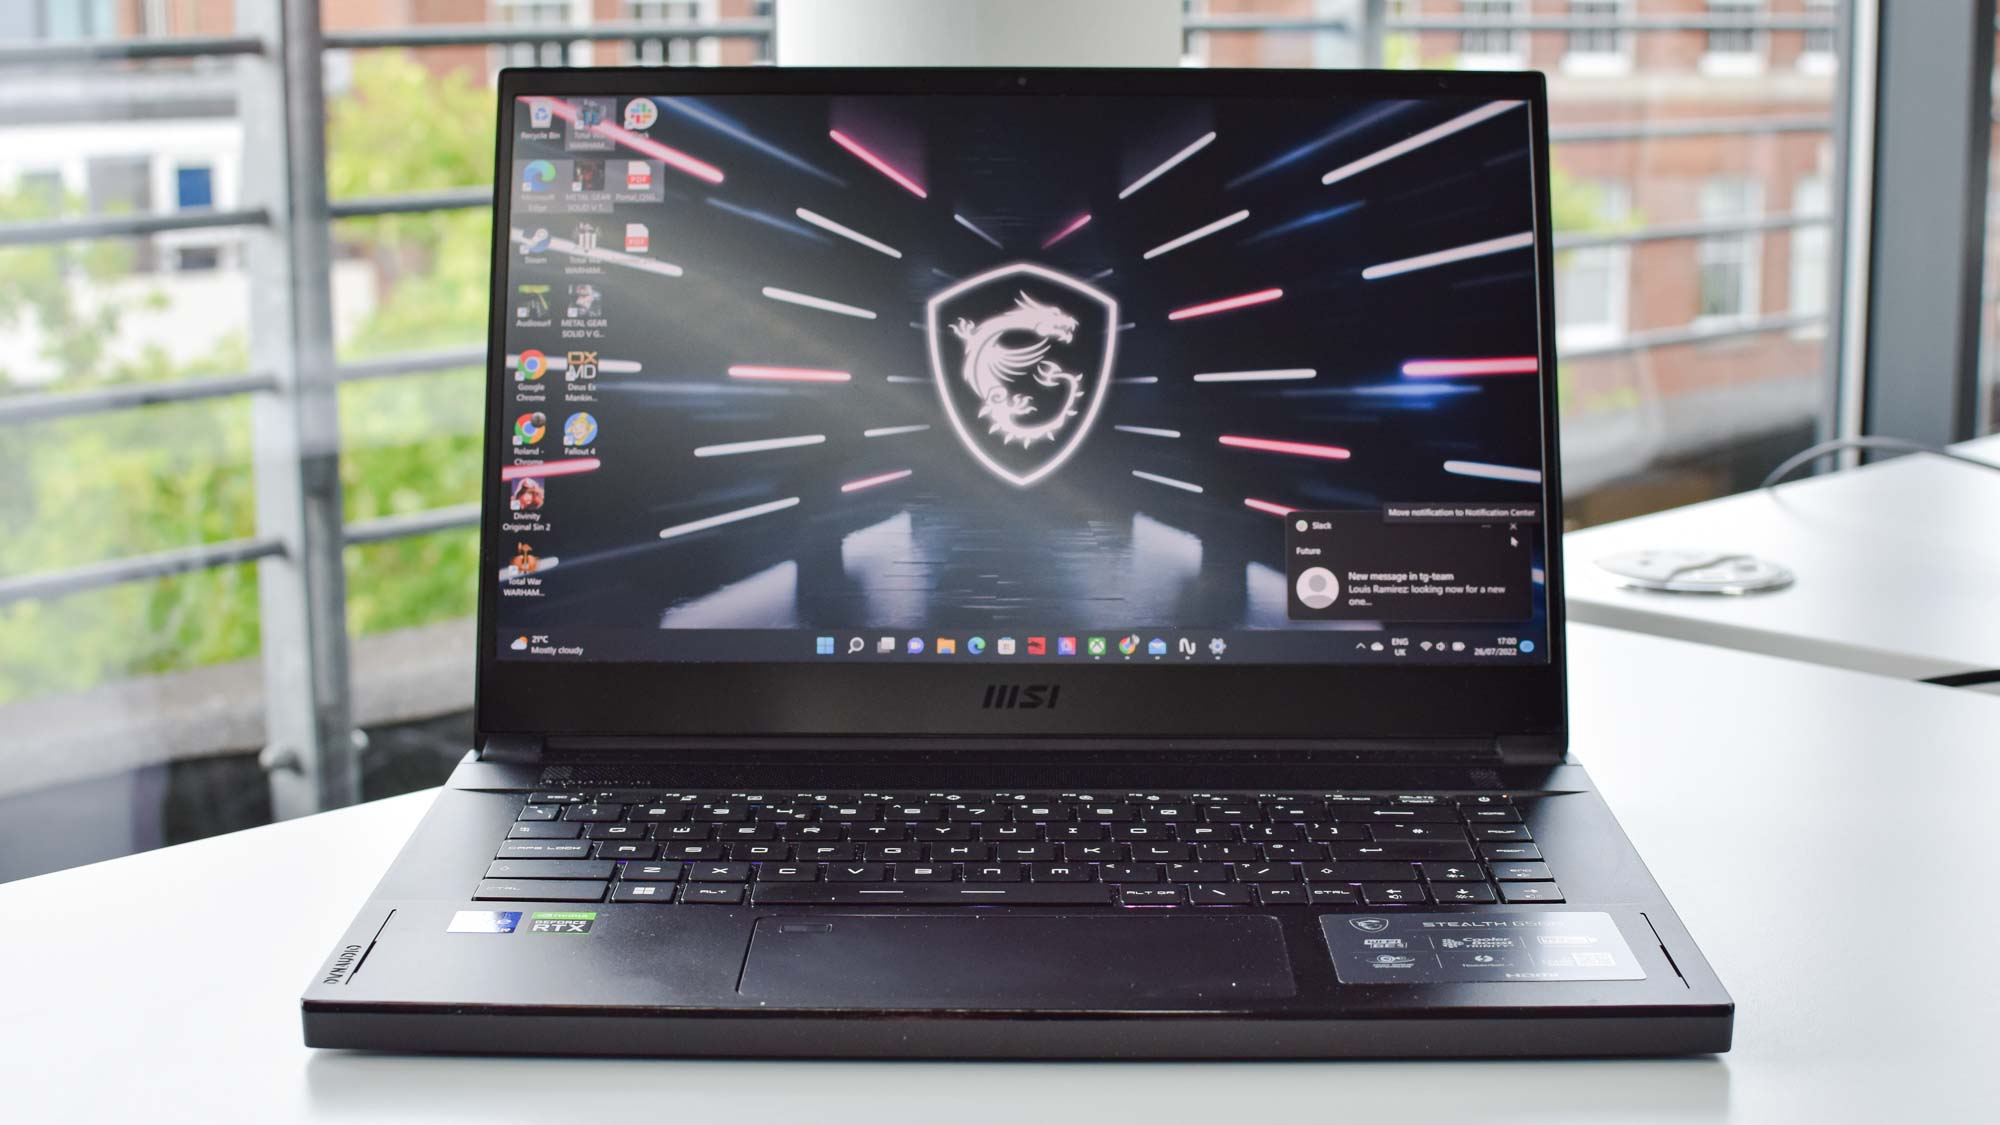 Here's why you should get a gaming laptop as your next work or college laptop